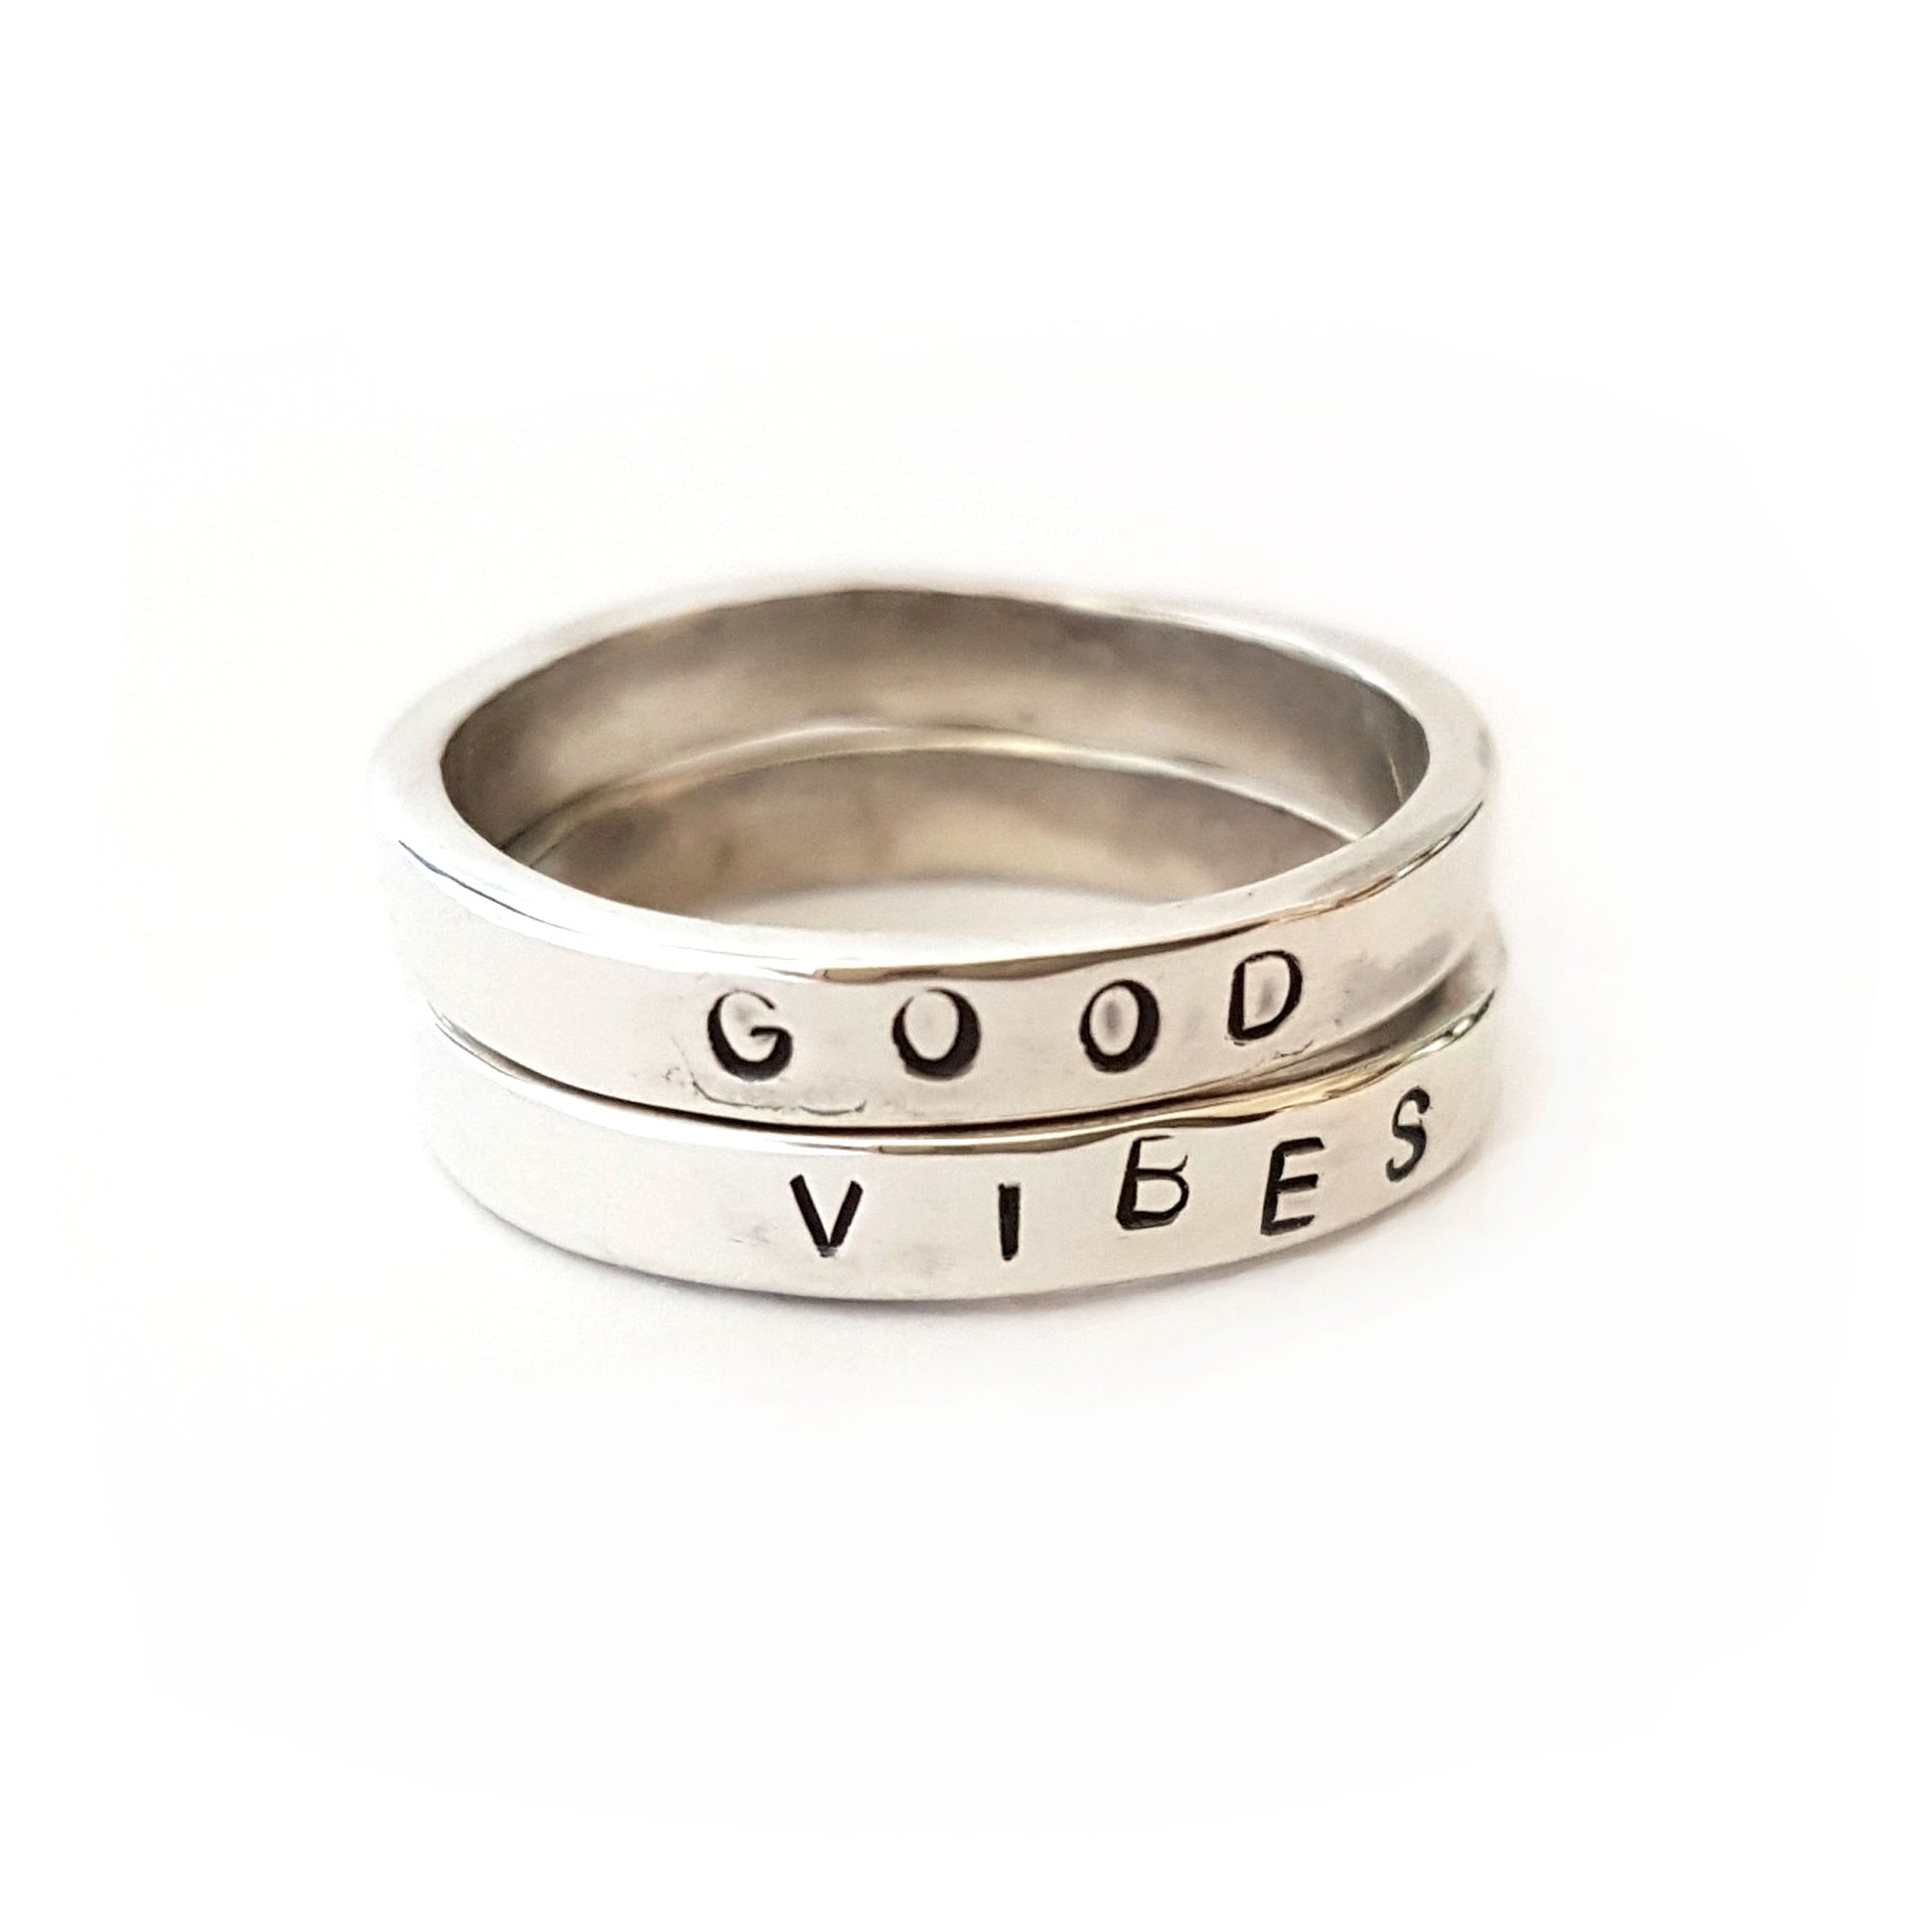 2 silver rings with the words "good vibes" stamped into them